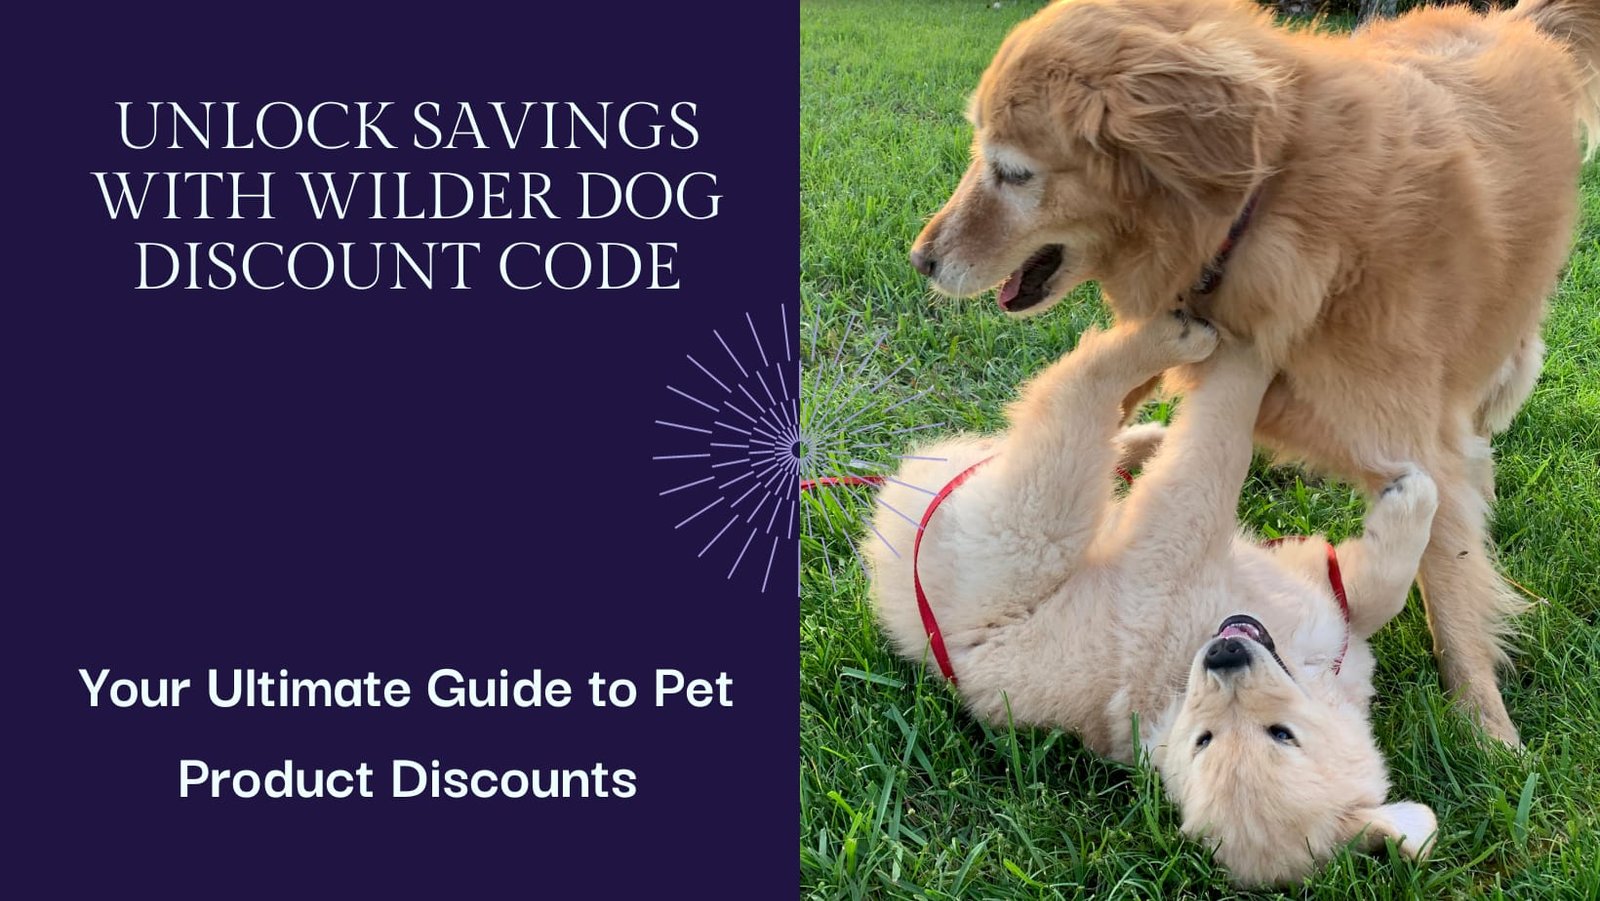 Unlock Savings with Wilder Dog Discount Code: Your Ultimate Guide to Pet Product Discounts